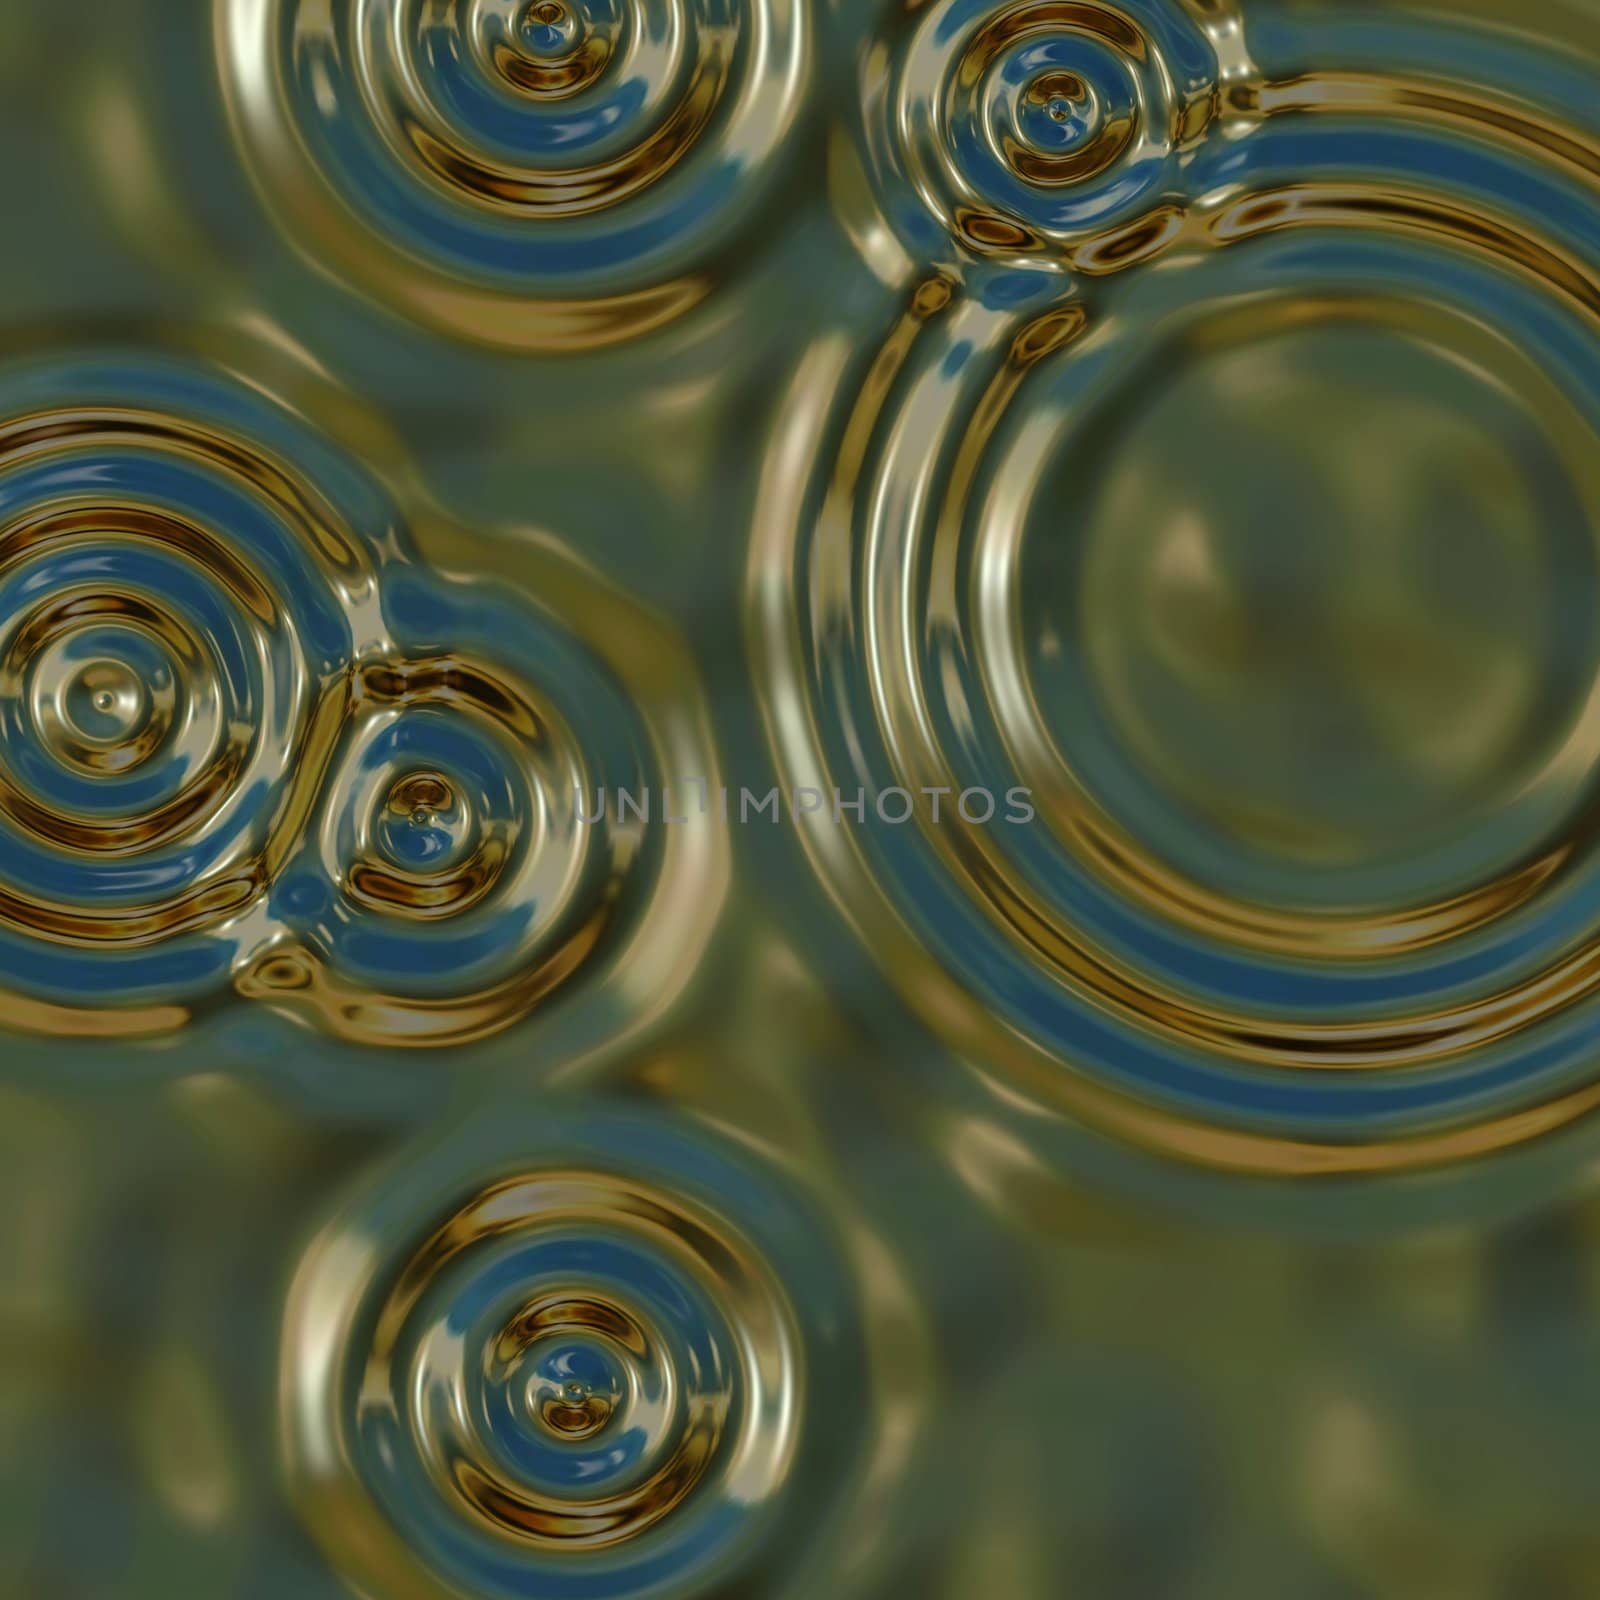 a large illustration of water like ripples in dark green molten metal / water